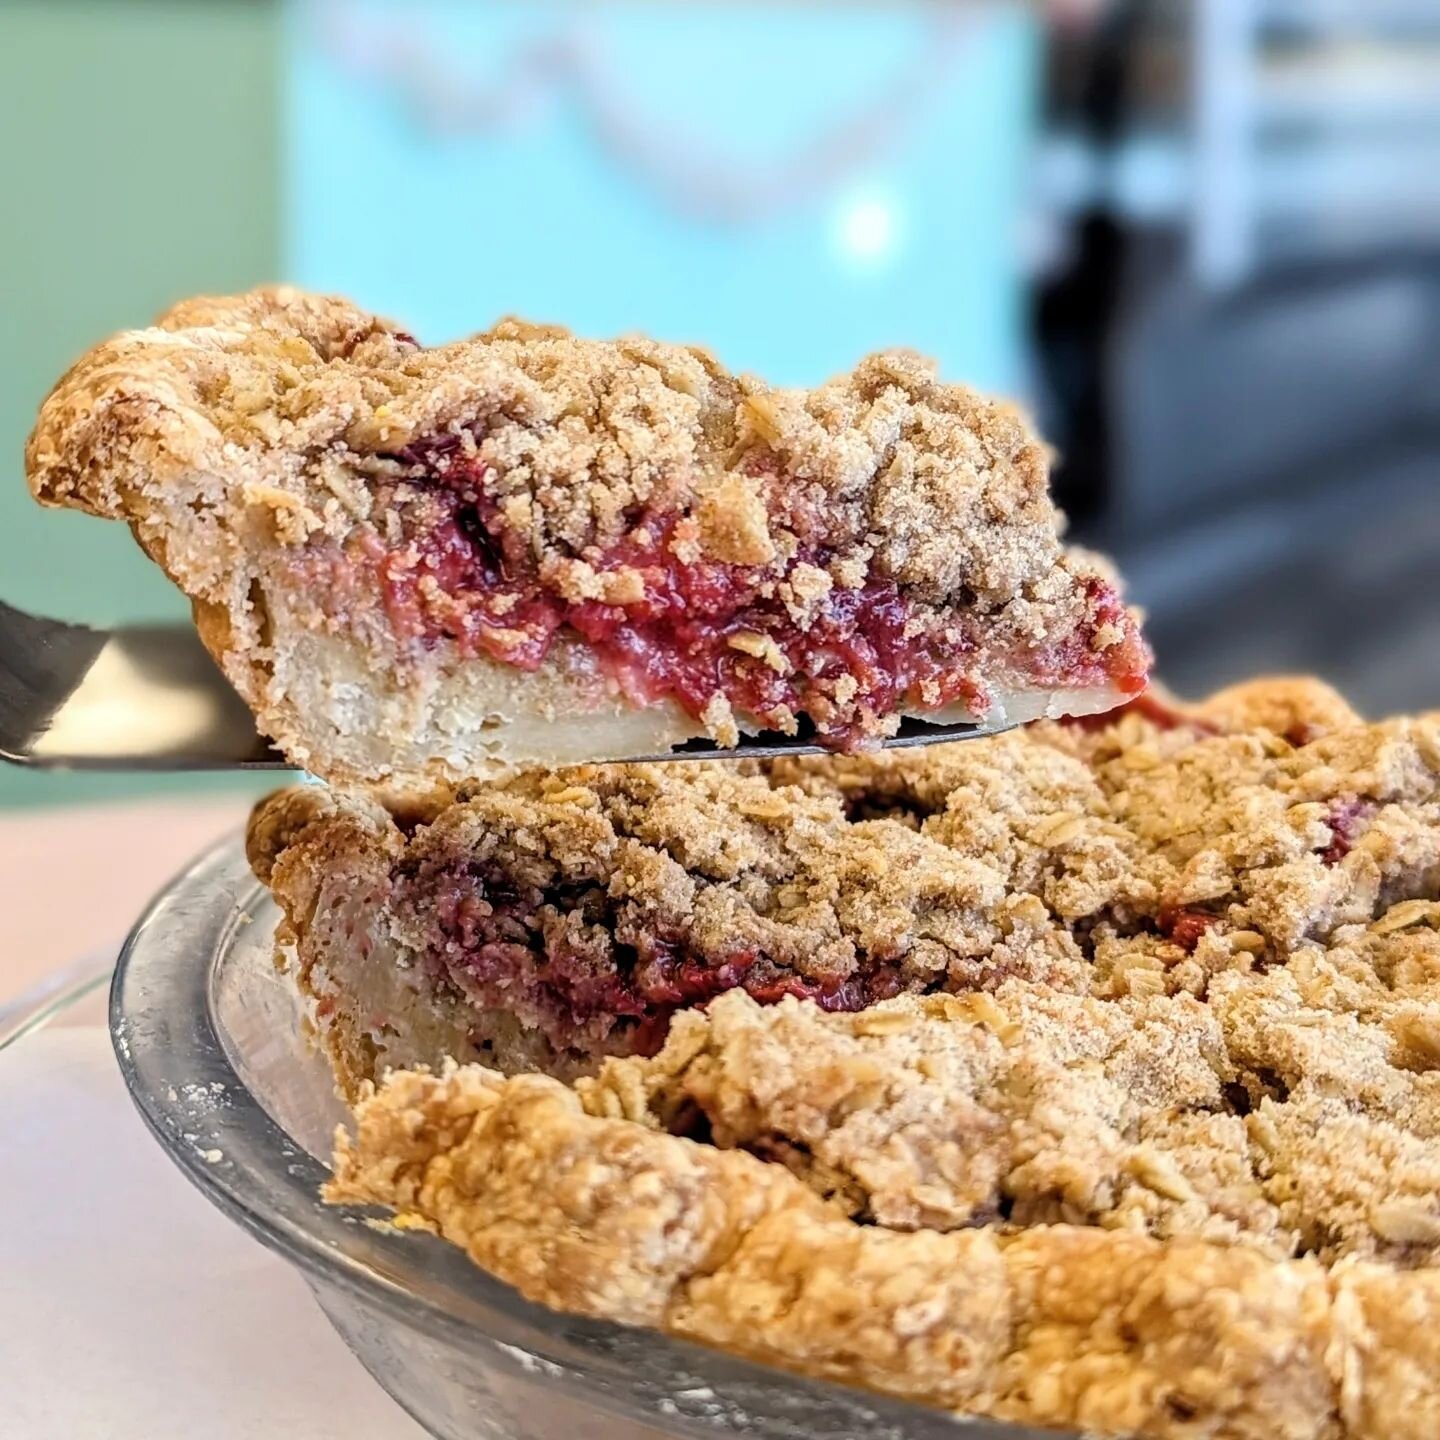 Happy Pi Day! We have for you what we like to call a PBJ Picnic Pie. 

Honey roasted peanut custard cream, fresh strawberries folded into homemade strawberry jam, topped with a cinnamon oat streusel in an all butter flaky crust. 

Your friends on the